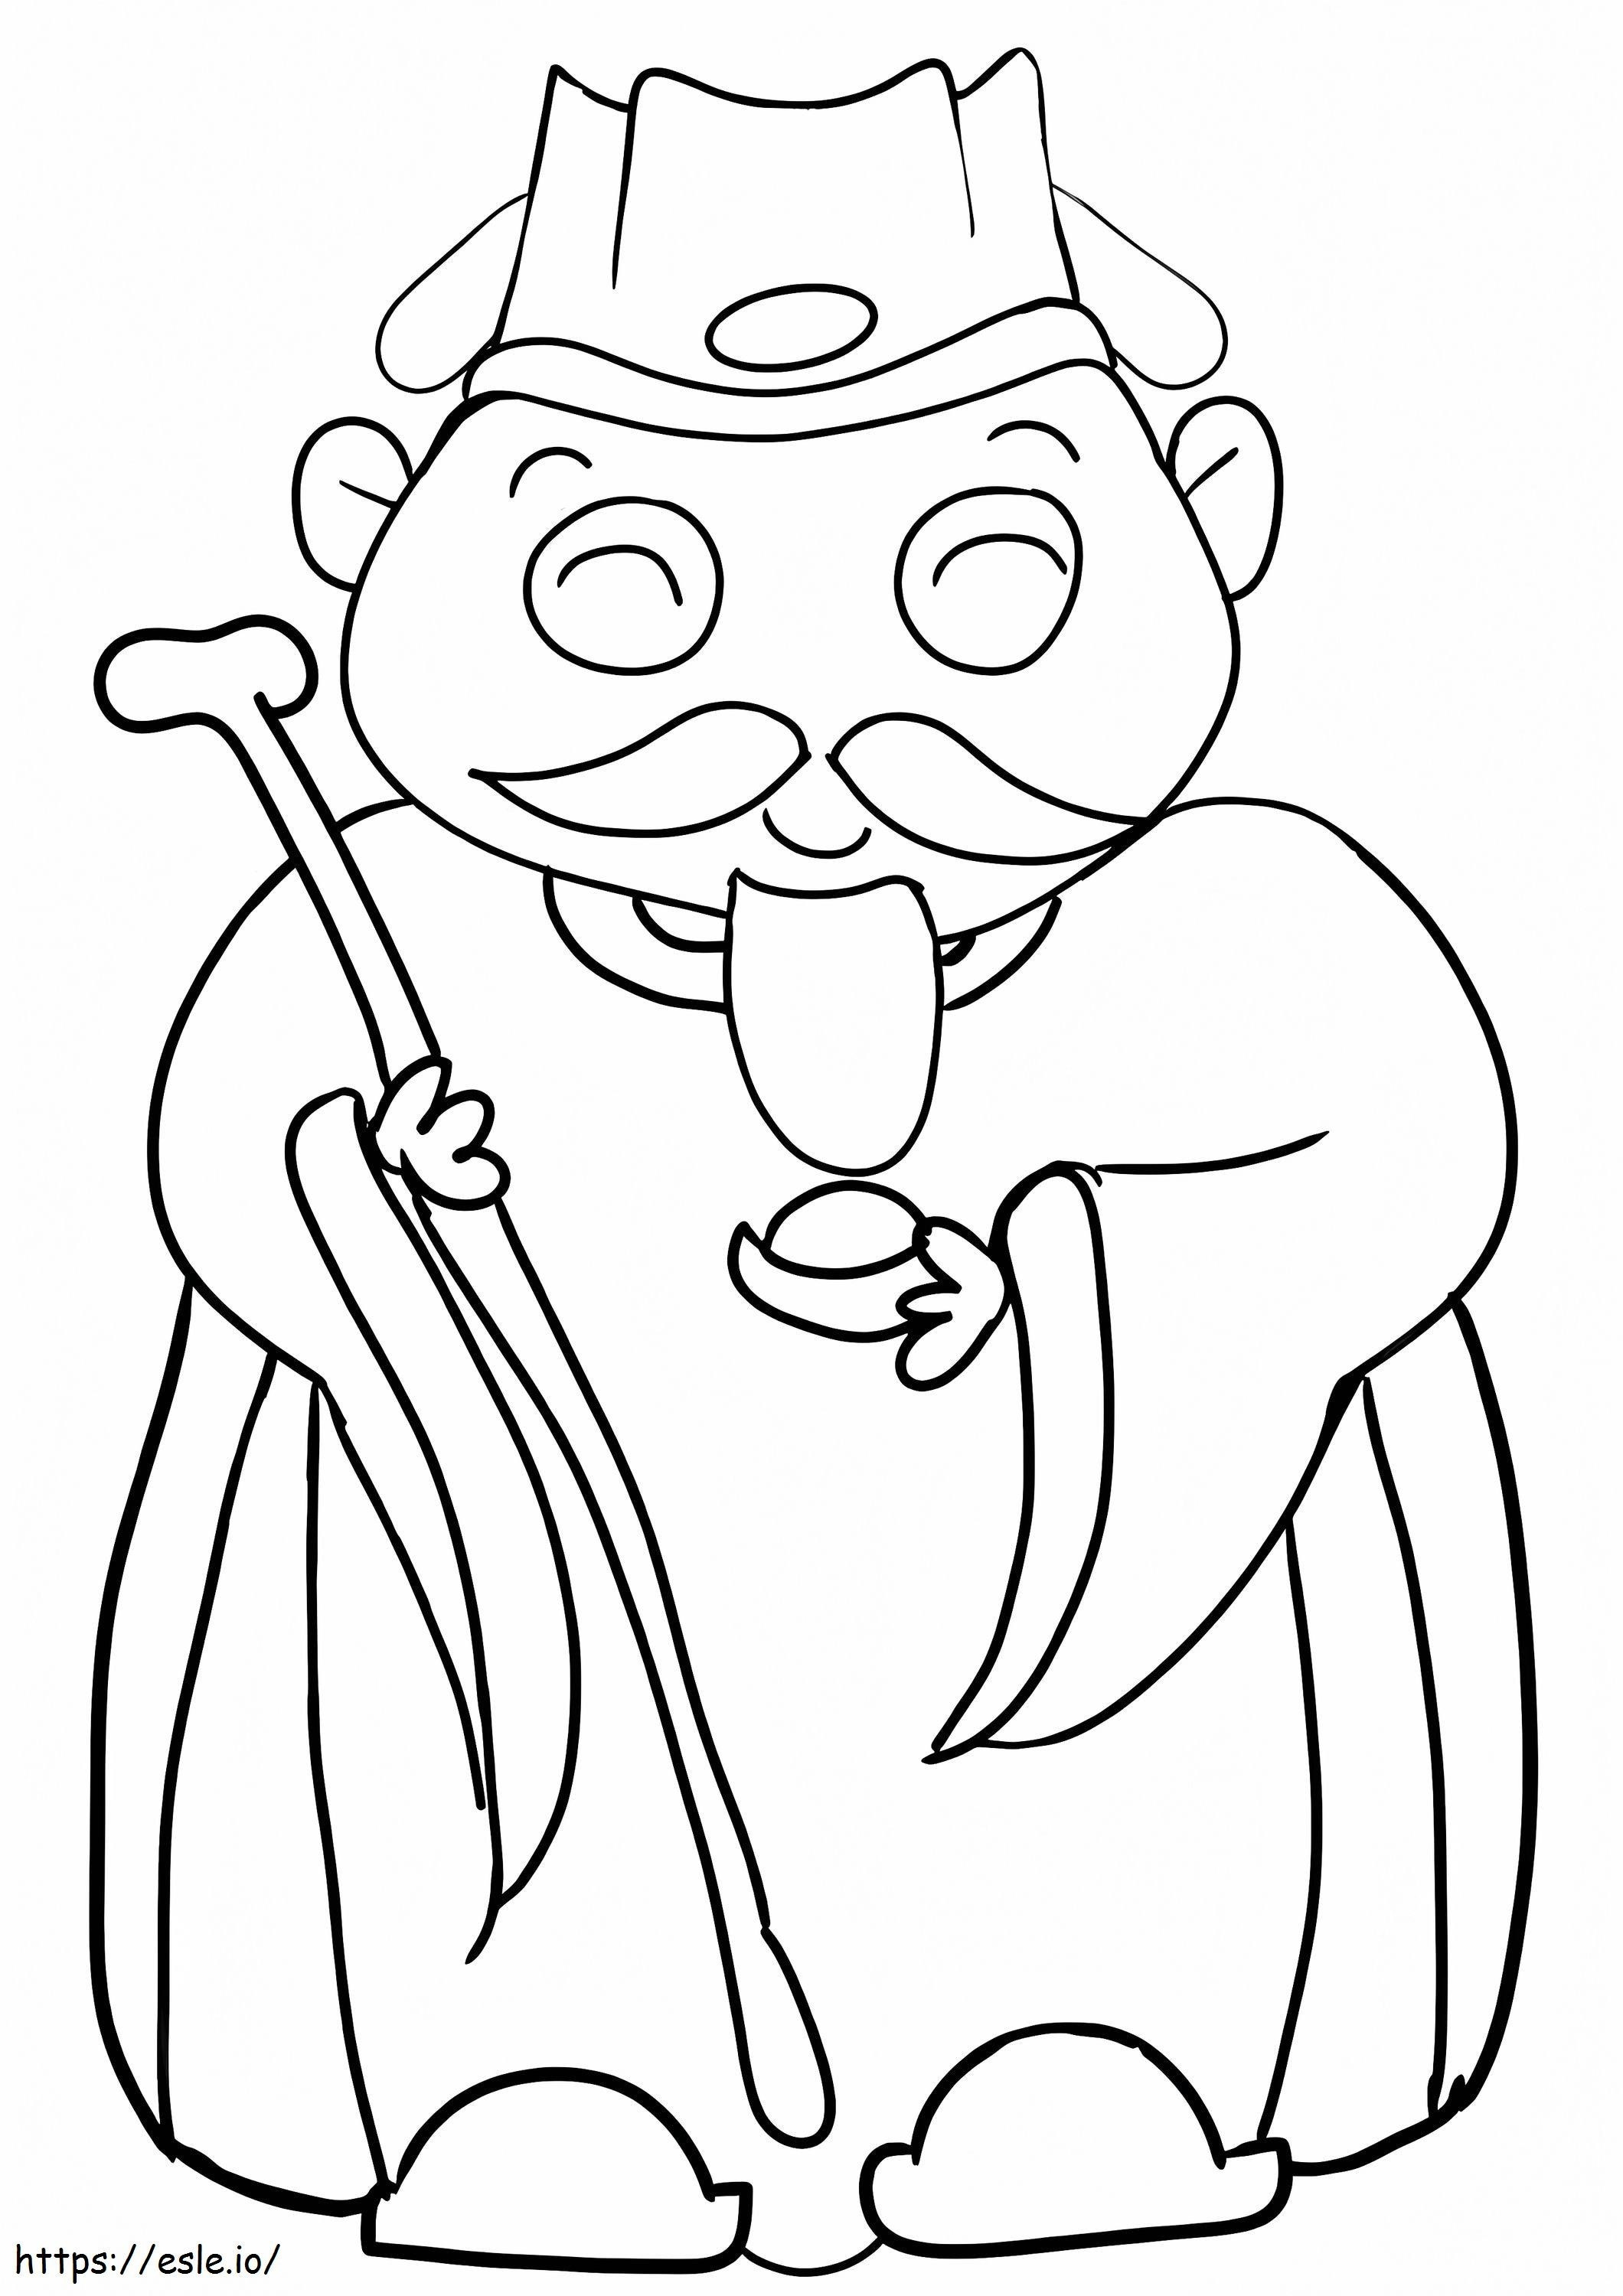 Chinese Wise Man coloring page